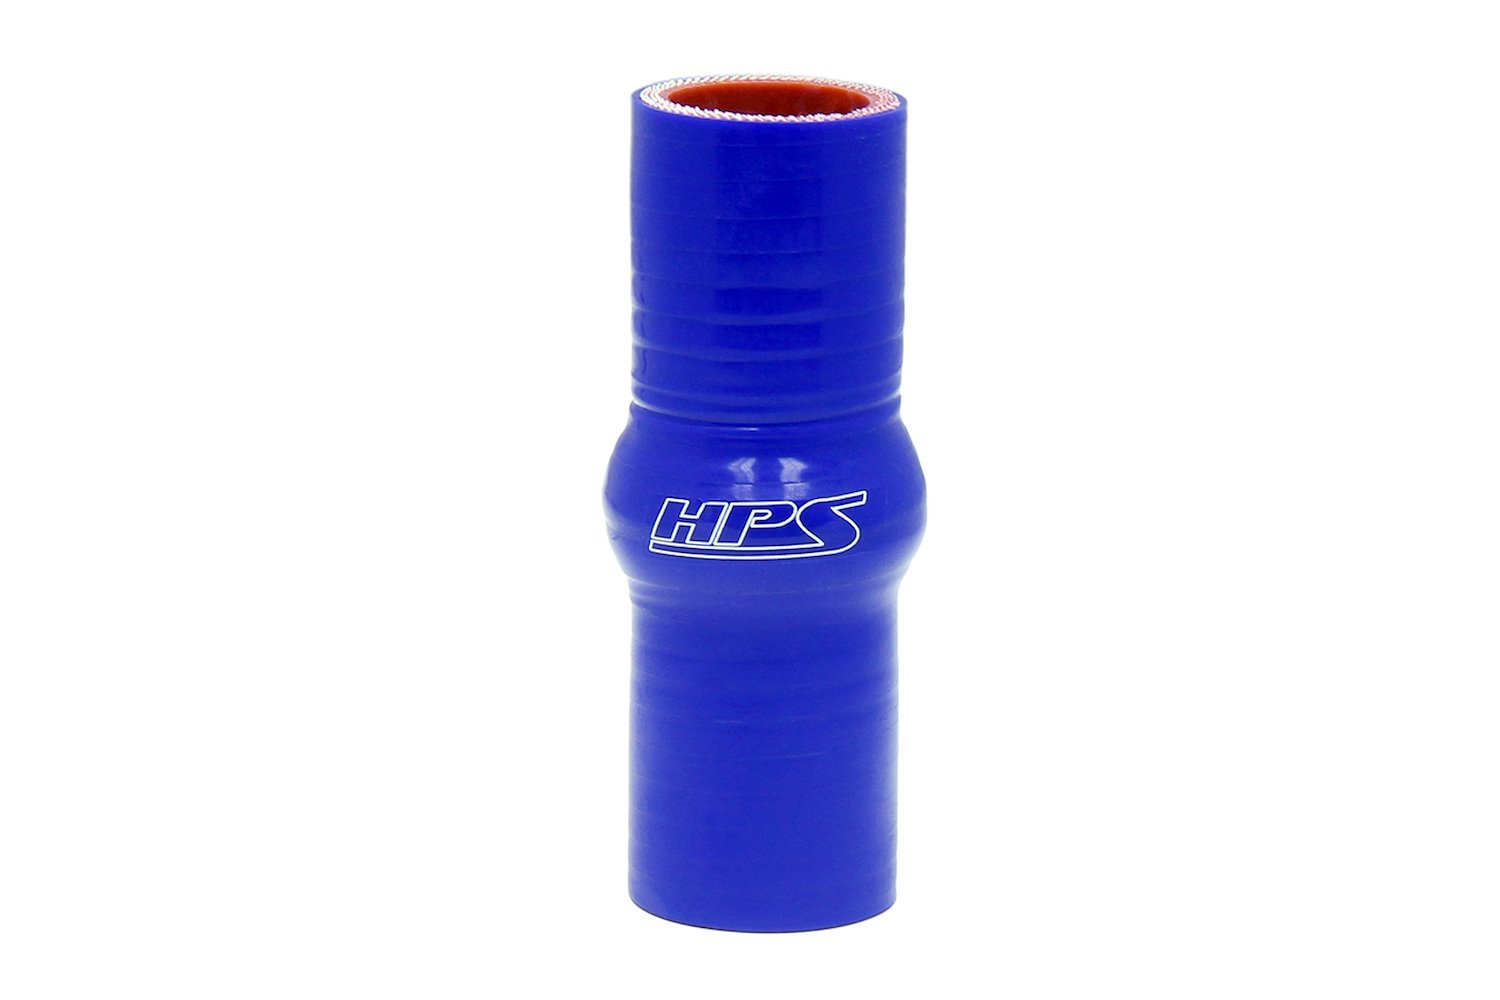 HTSHC-187-L6-BLUE Silicone Hump Coupler, High-Temp 4-Ply Reinforced, 1 7/8 in. ID, 6 in. Length.